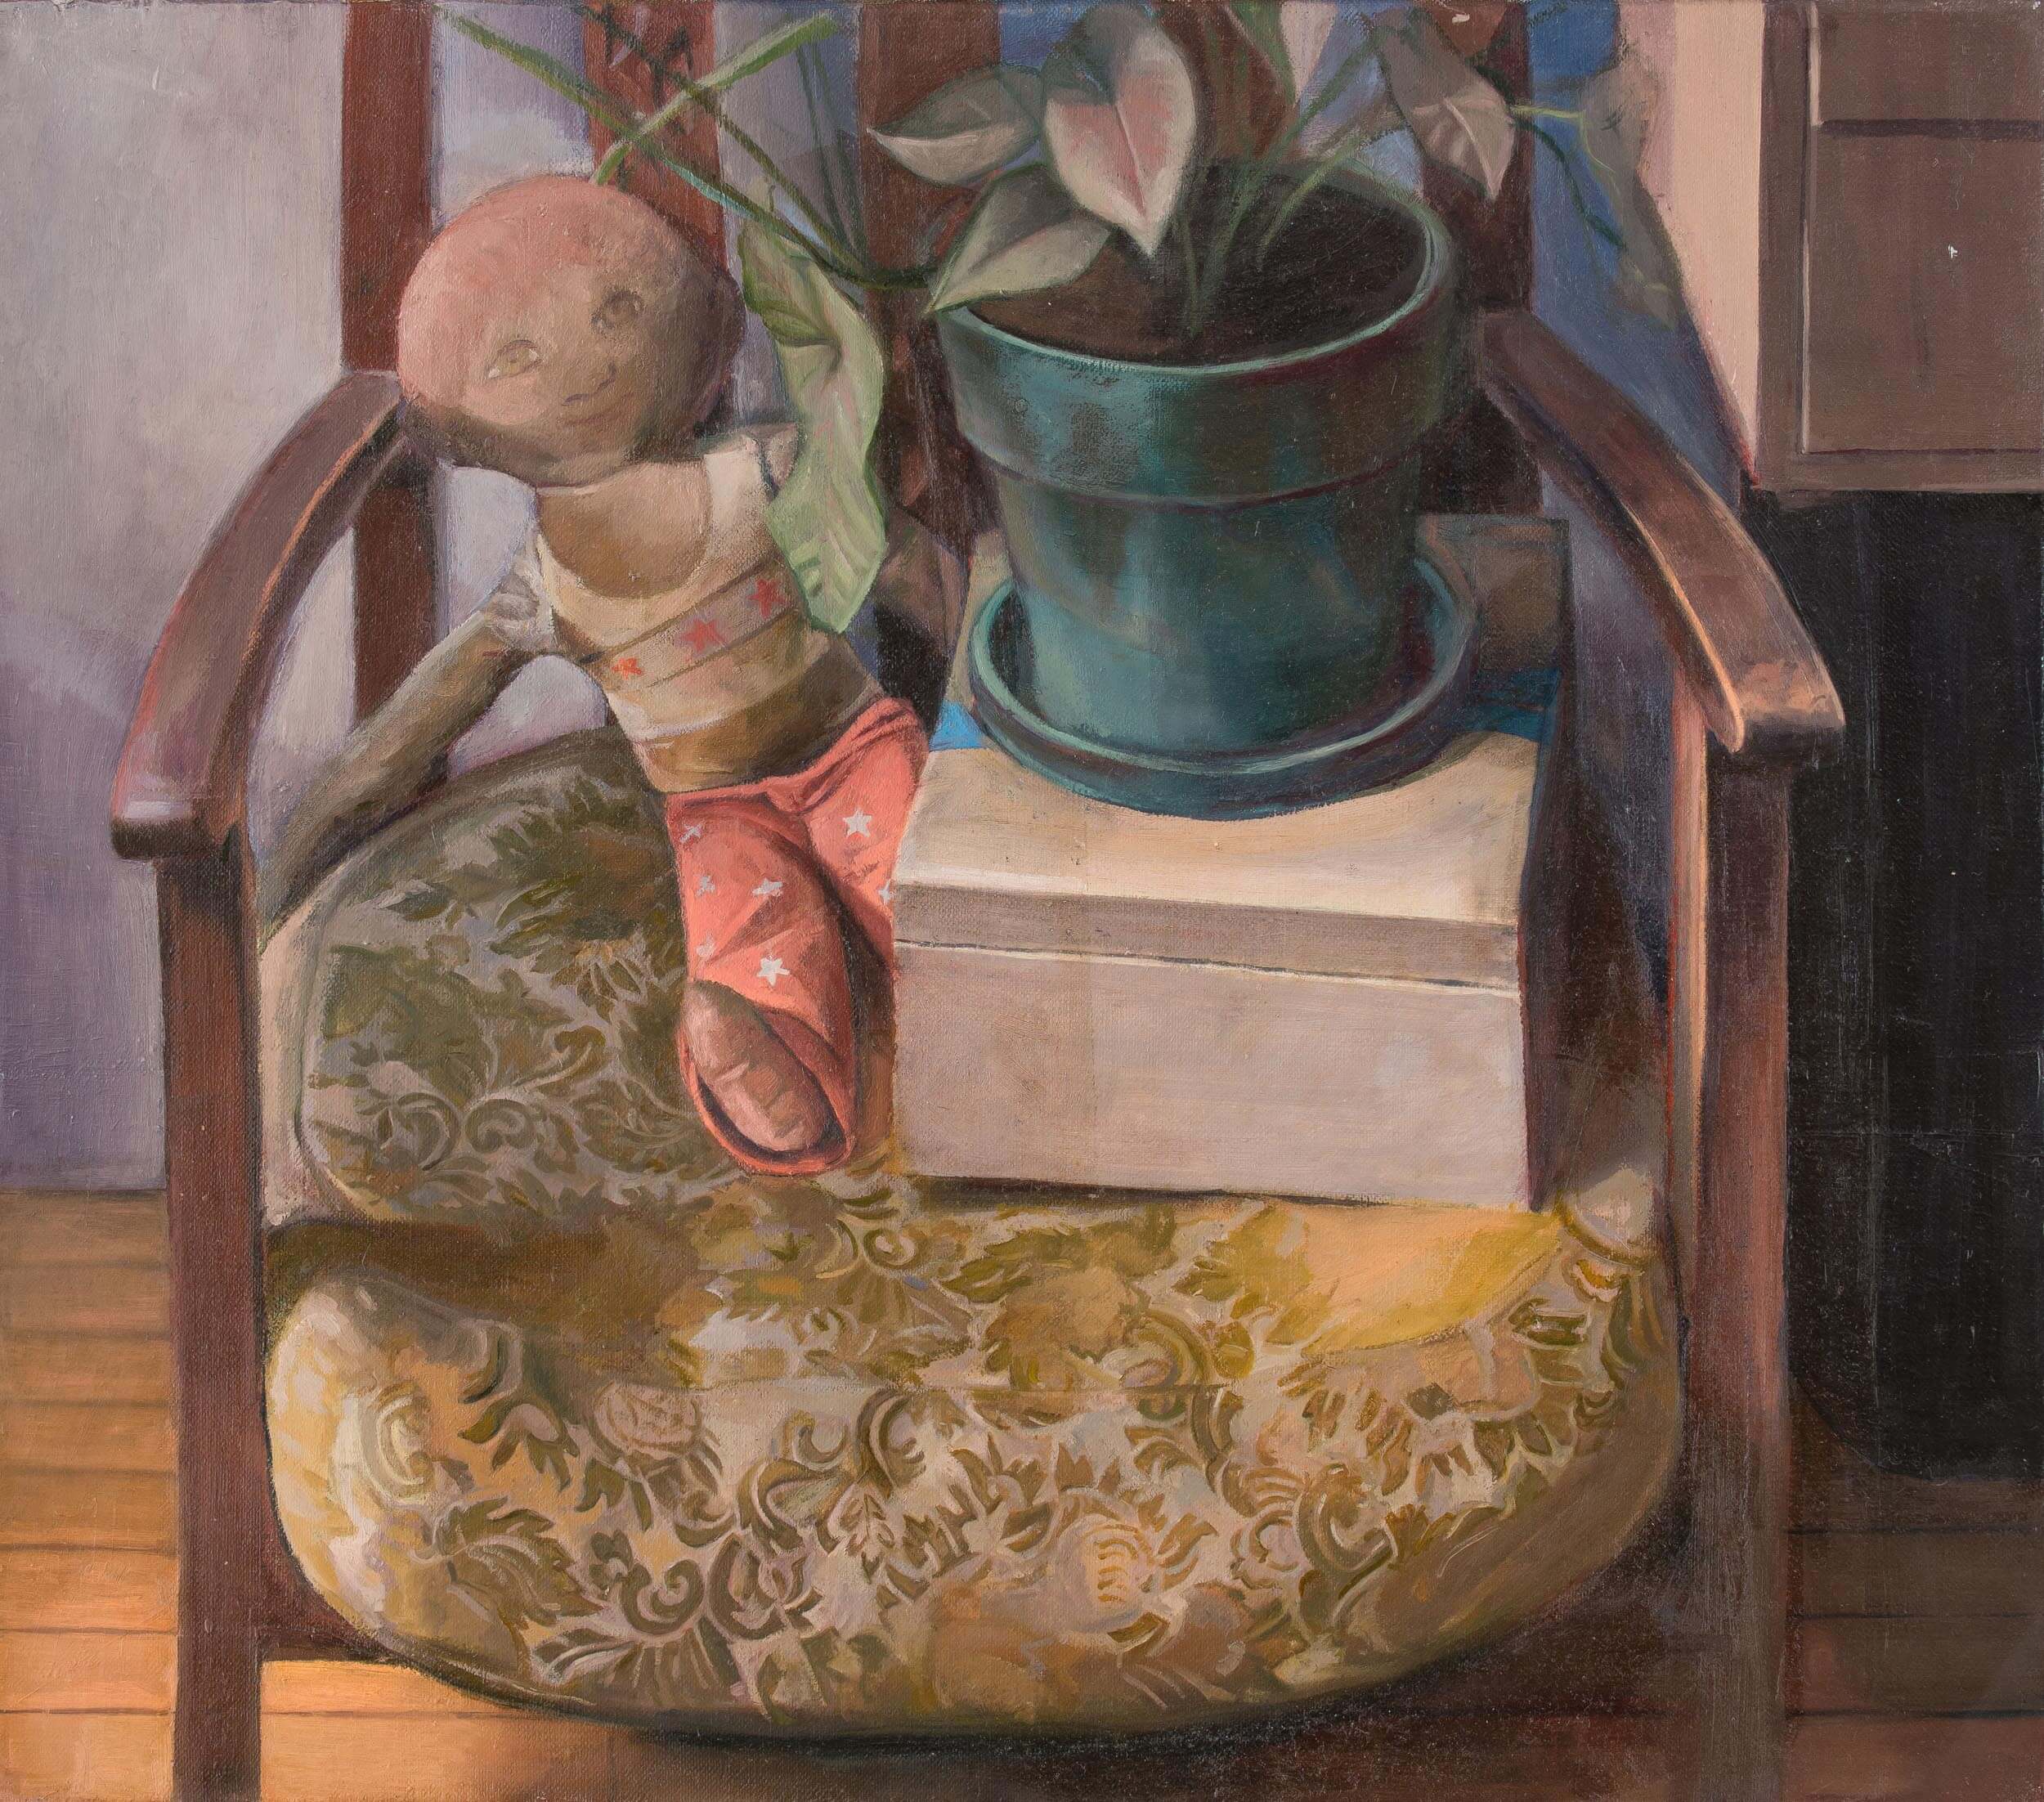 Thomas Walton, A Look Back, 2013, oil on linen, 22 × 25 inches (courtesy of the artist)